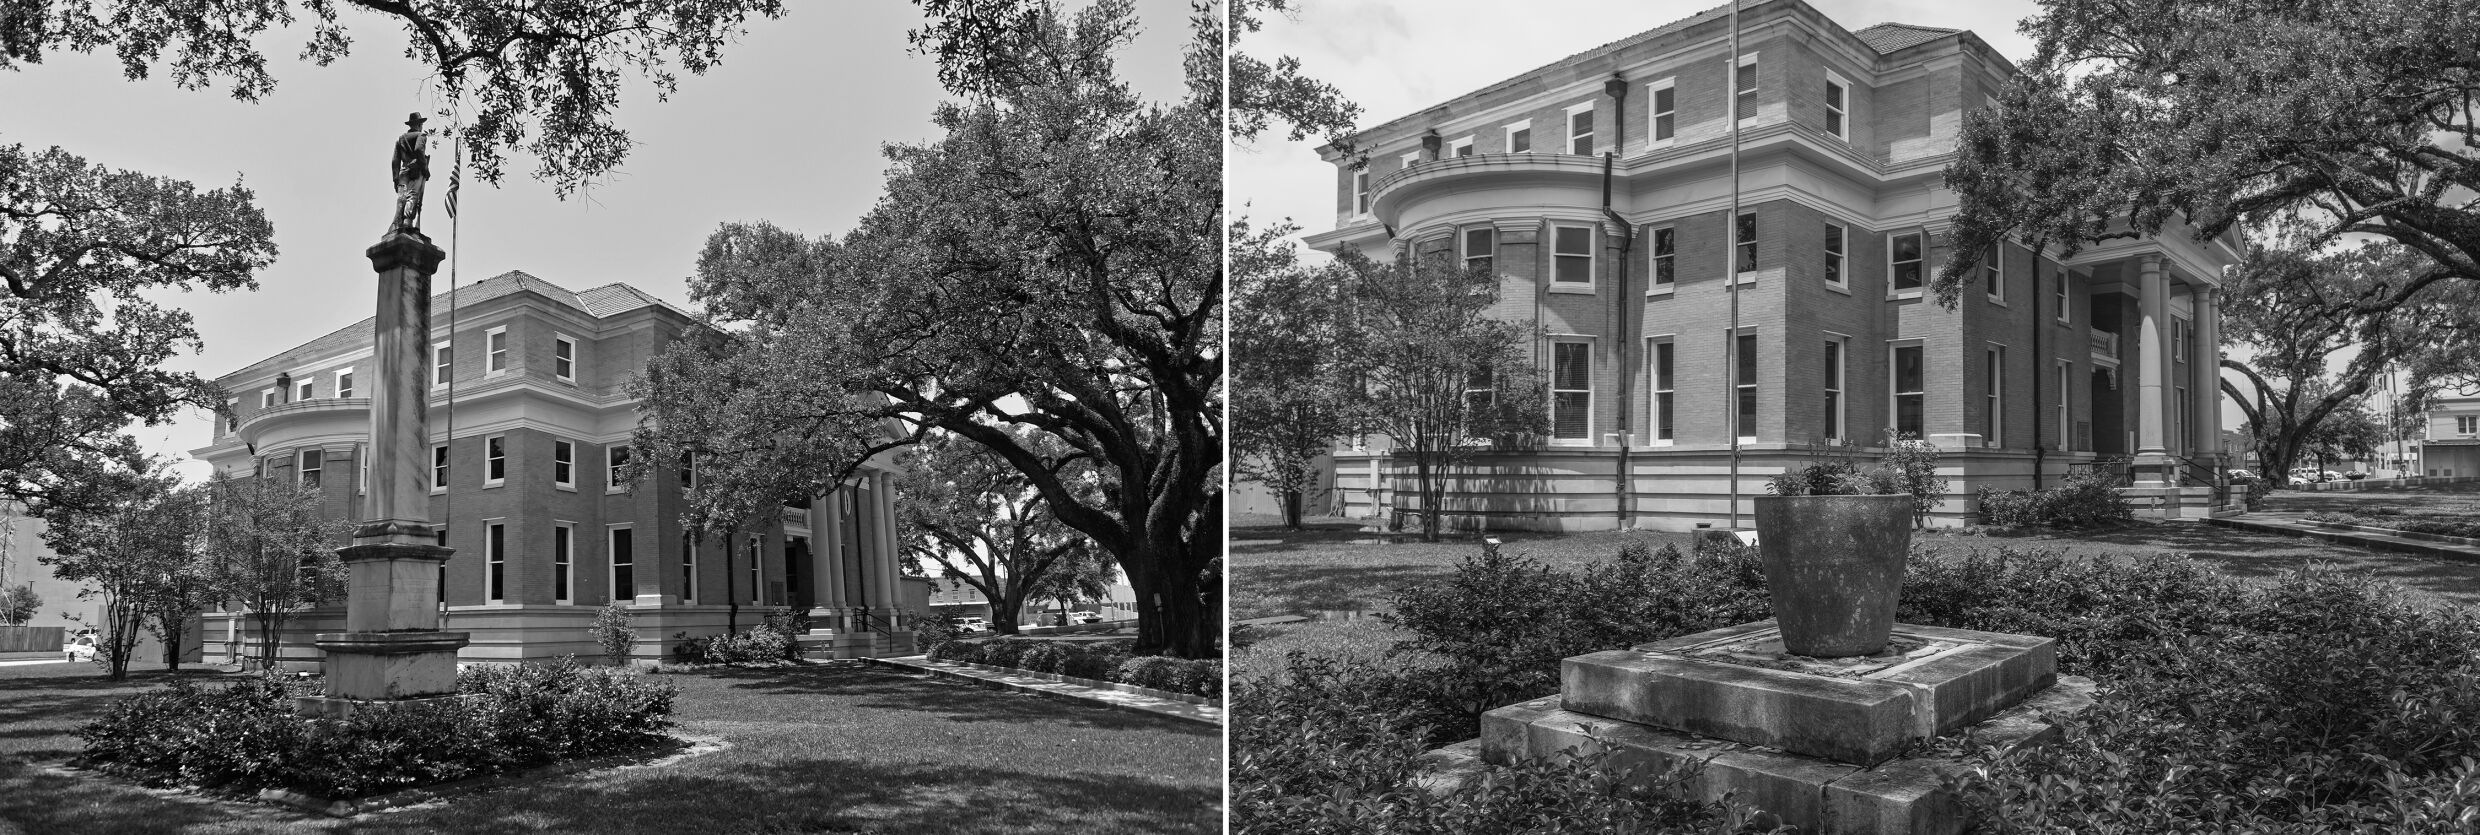 (Left) A Confederate statue stands near the city of Plaquemine's courthouse on June 17, 2020, in Plaquemine, Louisiana. Image by Hilary Scheinuk/The Advocate. (Right) The Iberville Parish Council unanimously voted in June 2020 to remove the Confederate monument in front of Plaquemine’s old courthouse.